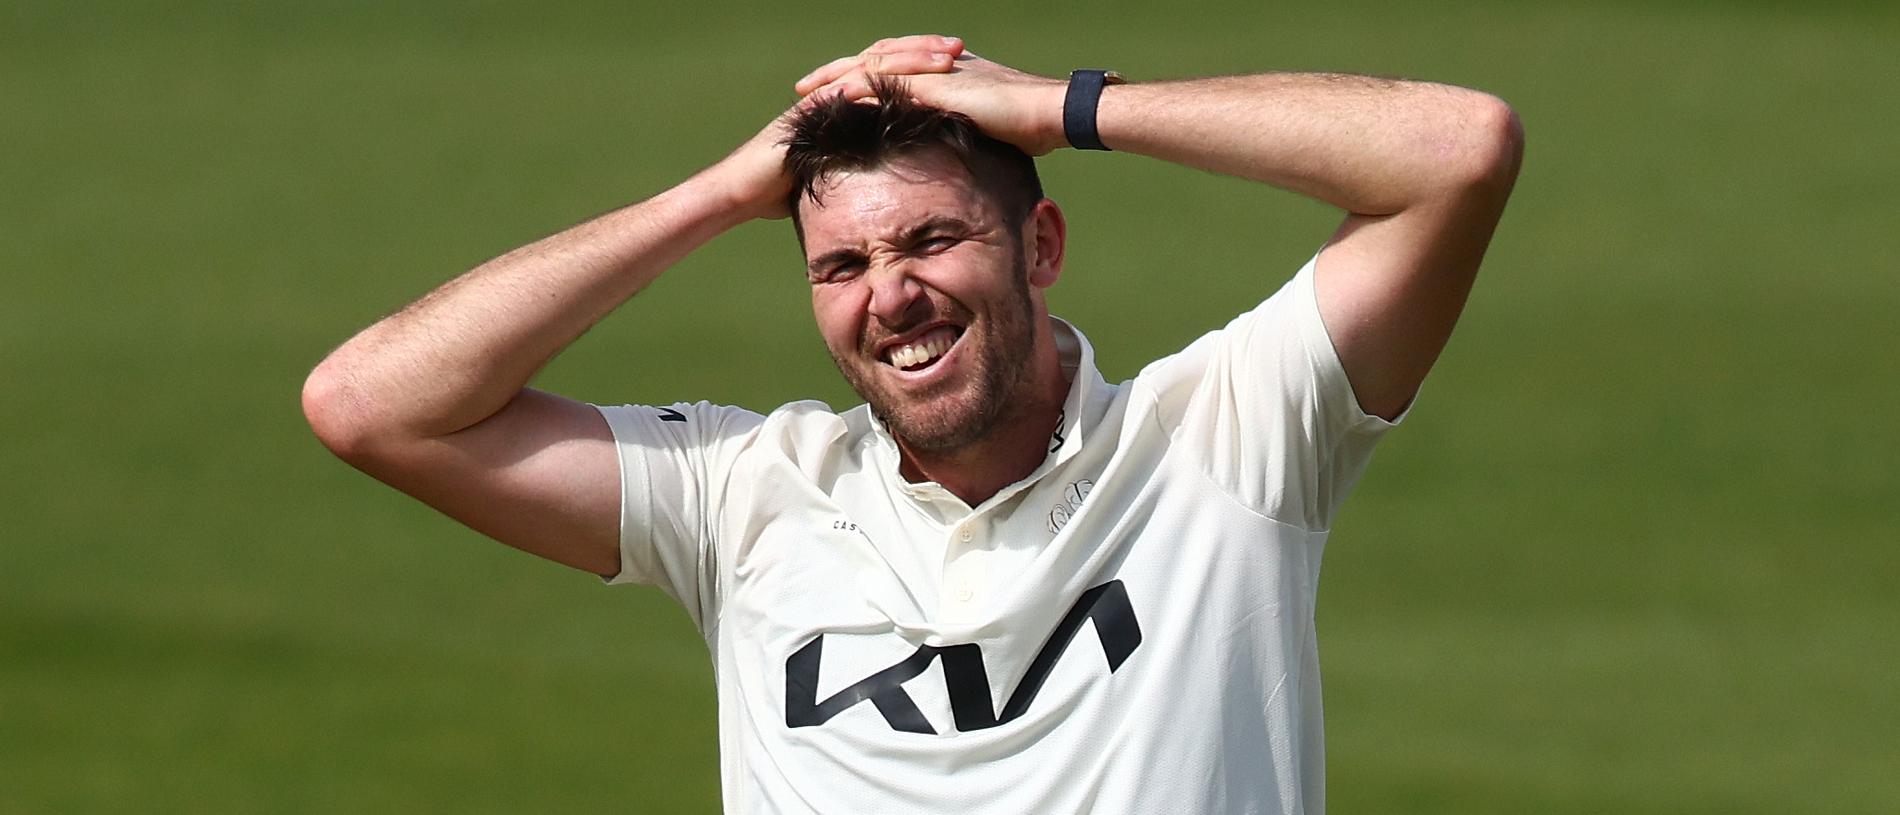 LONDON, ENGLAND - APRIL 12: Jamie Overton of Surrey reacts during the Vitality County Championship match between Surrey and Somerset at the Kia Oval on April 12, 2024 in London, England. (Photo by Ben Hoskins/Getty Images for Surrey CCC)